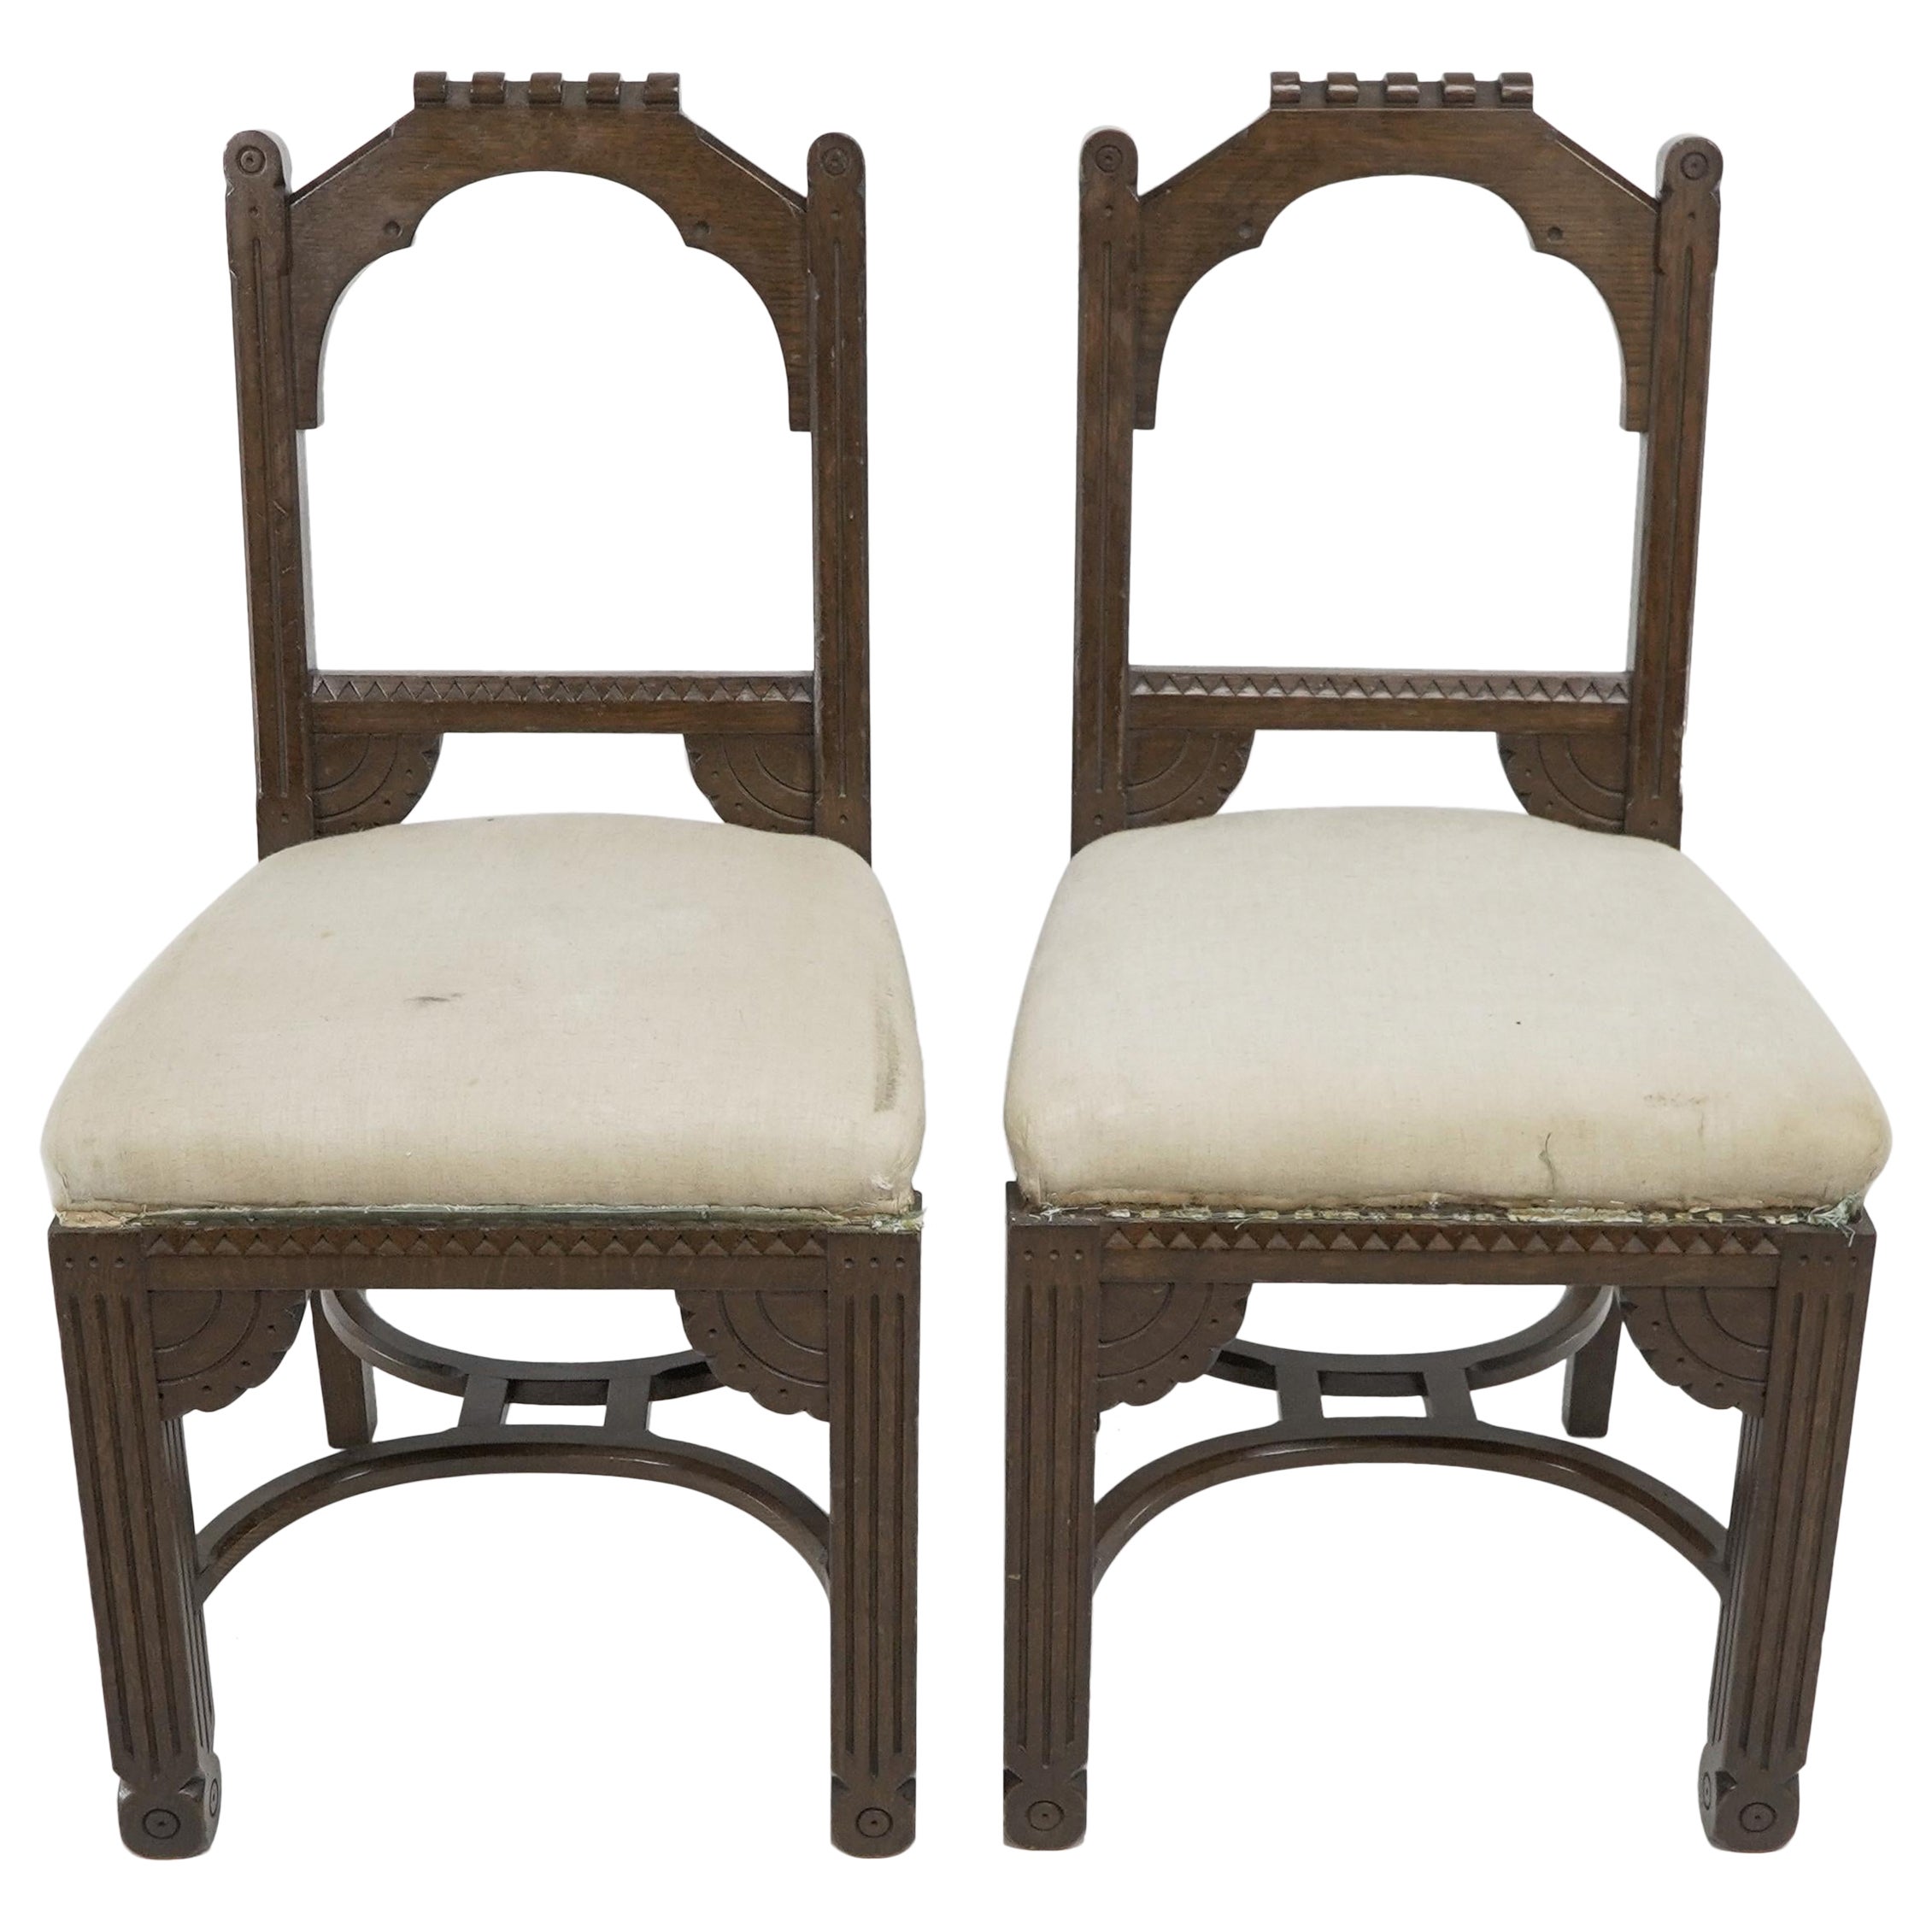 R Boyd. in the style of Dr C Dresser. A pair of Aesthetic Movement oak side chairs with 1/4 moon details and double hoop stretchers. Furniture by R Boyd was illustrated in the Furniture Gazette when Dr C Dresser was the editor between 1880 and 1881.